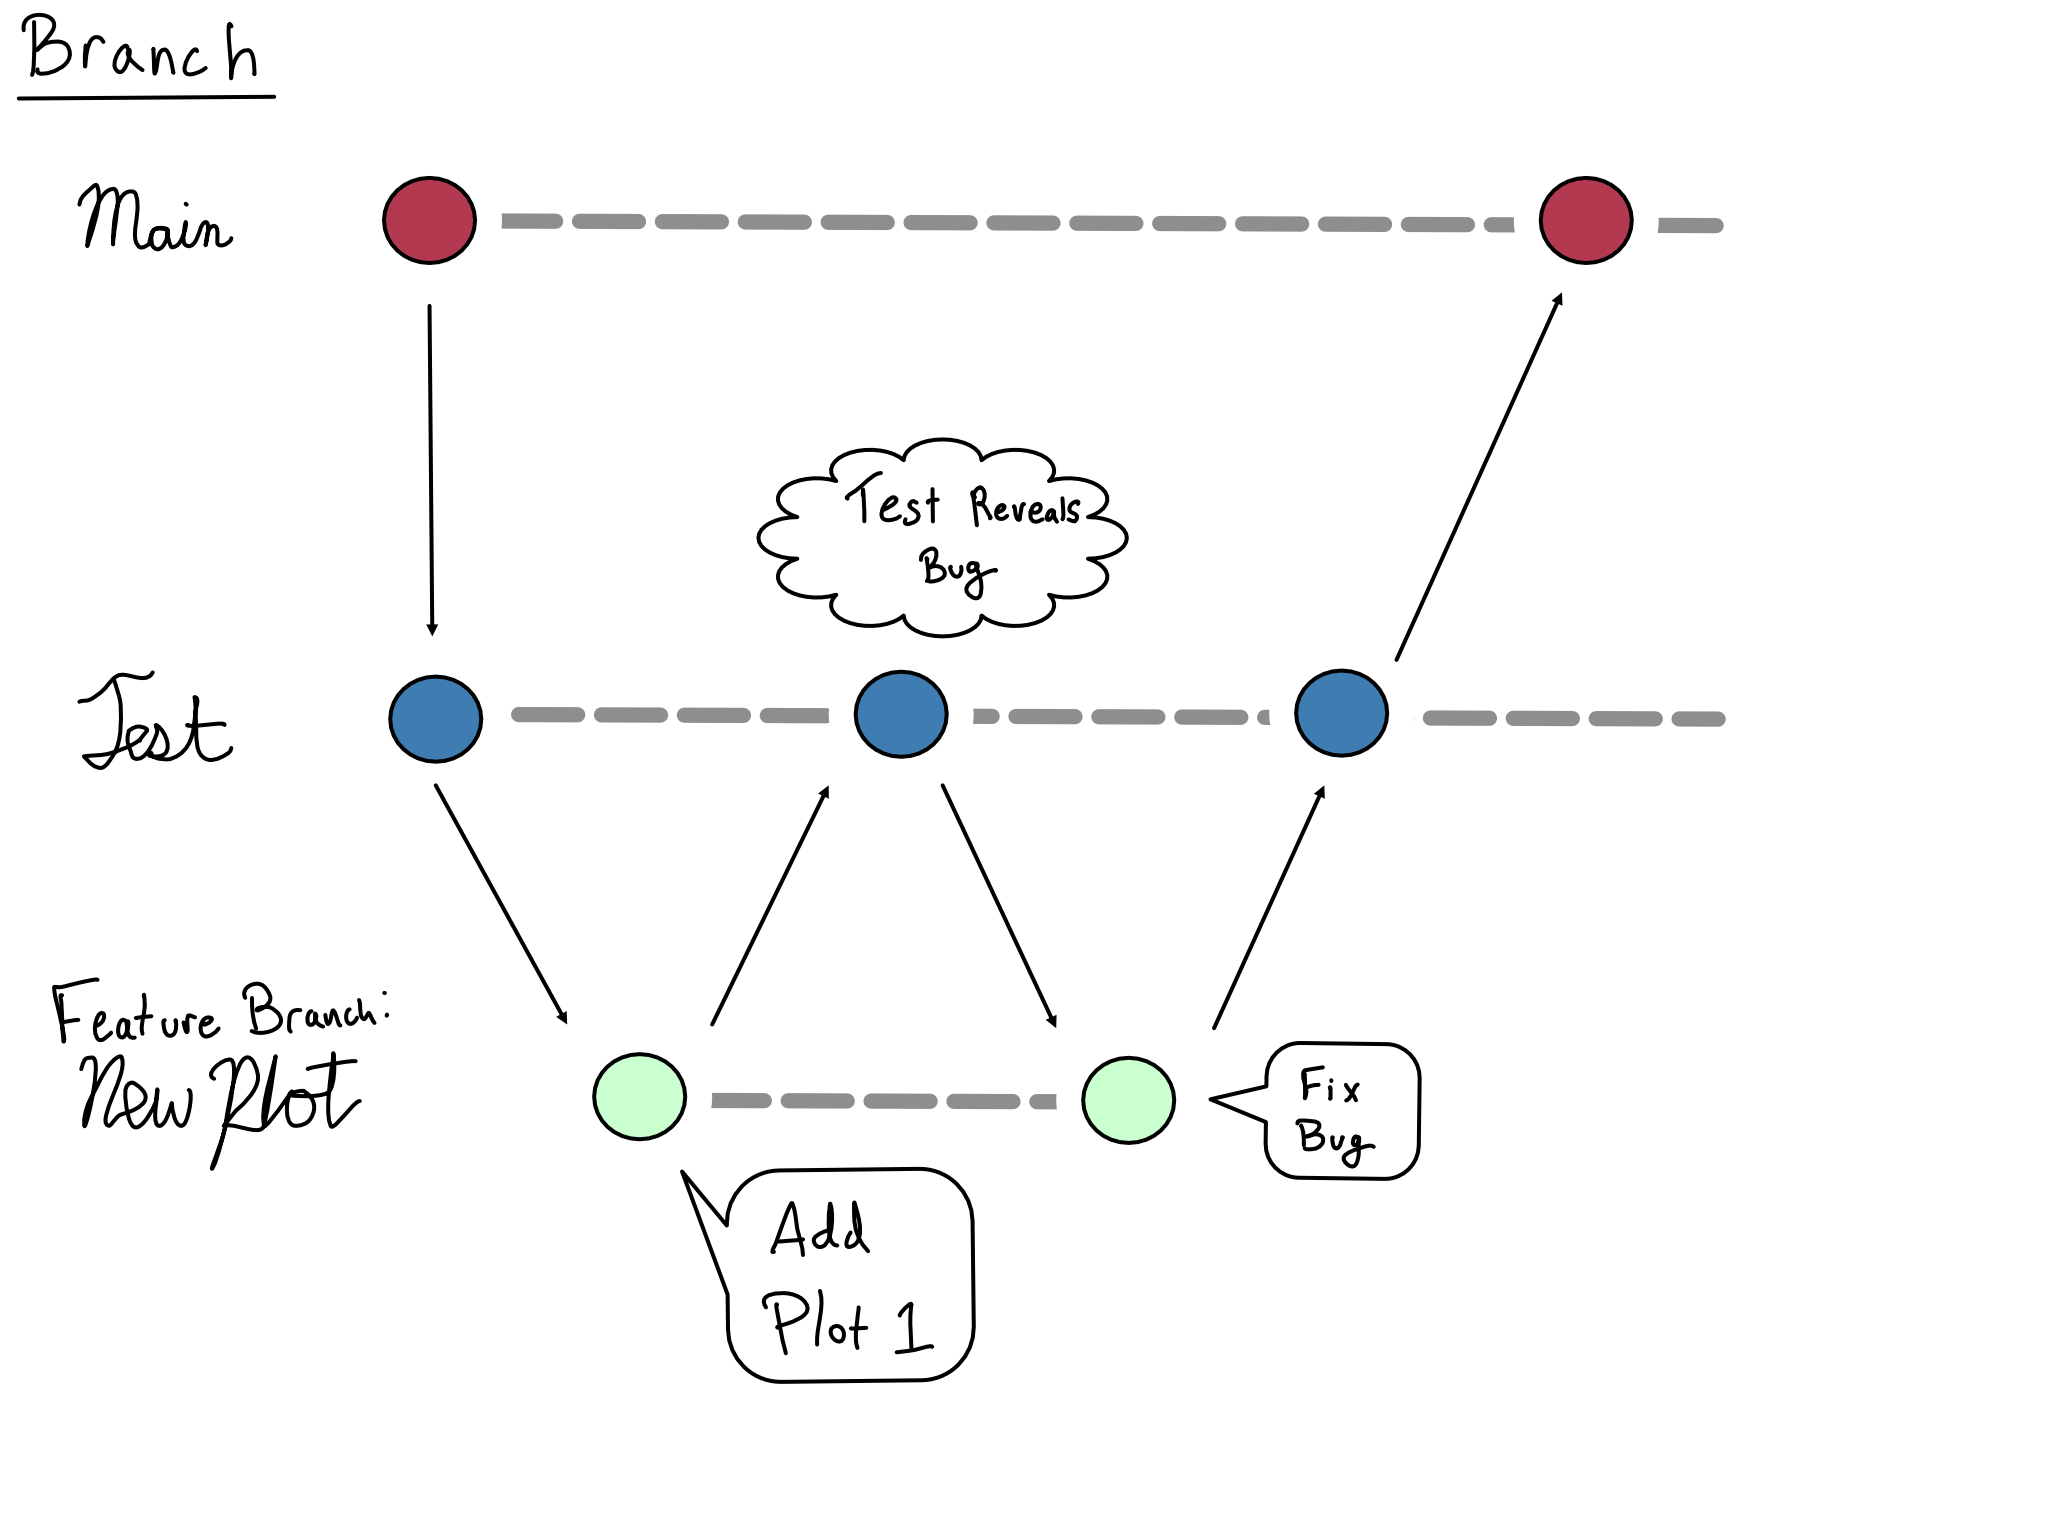 Diagram showing branching strategy. A feature branch called new plot is created from and then merged back to test. A bug is revealed, so another commit fixing the bug is merged into test and then into main.